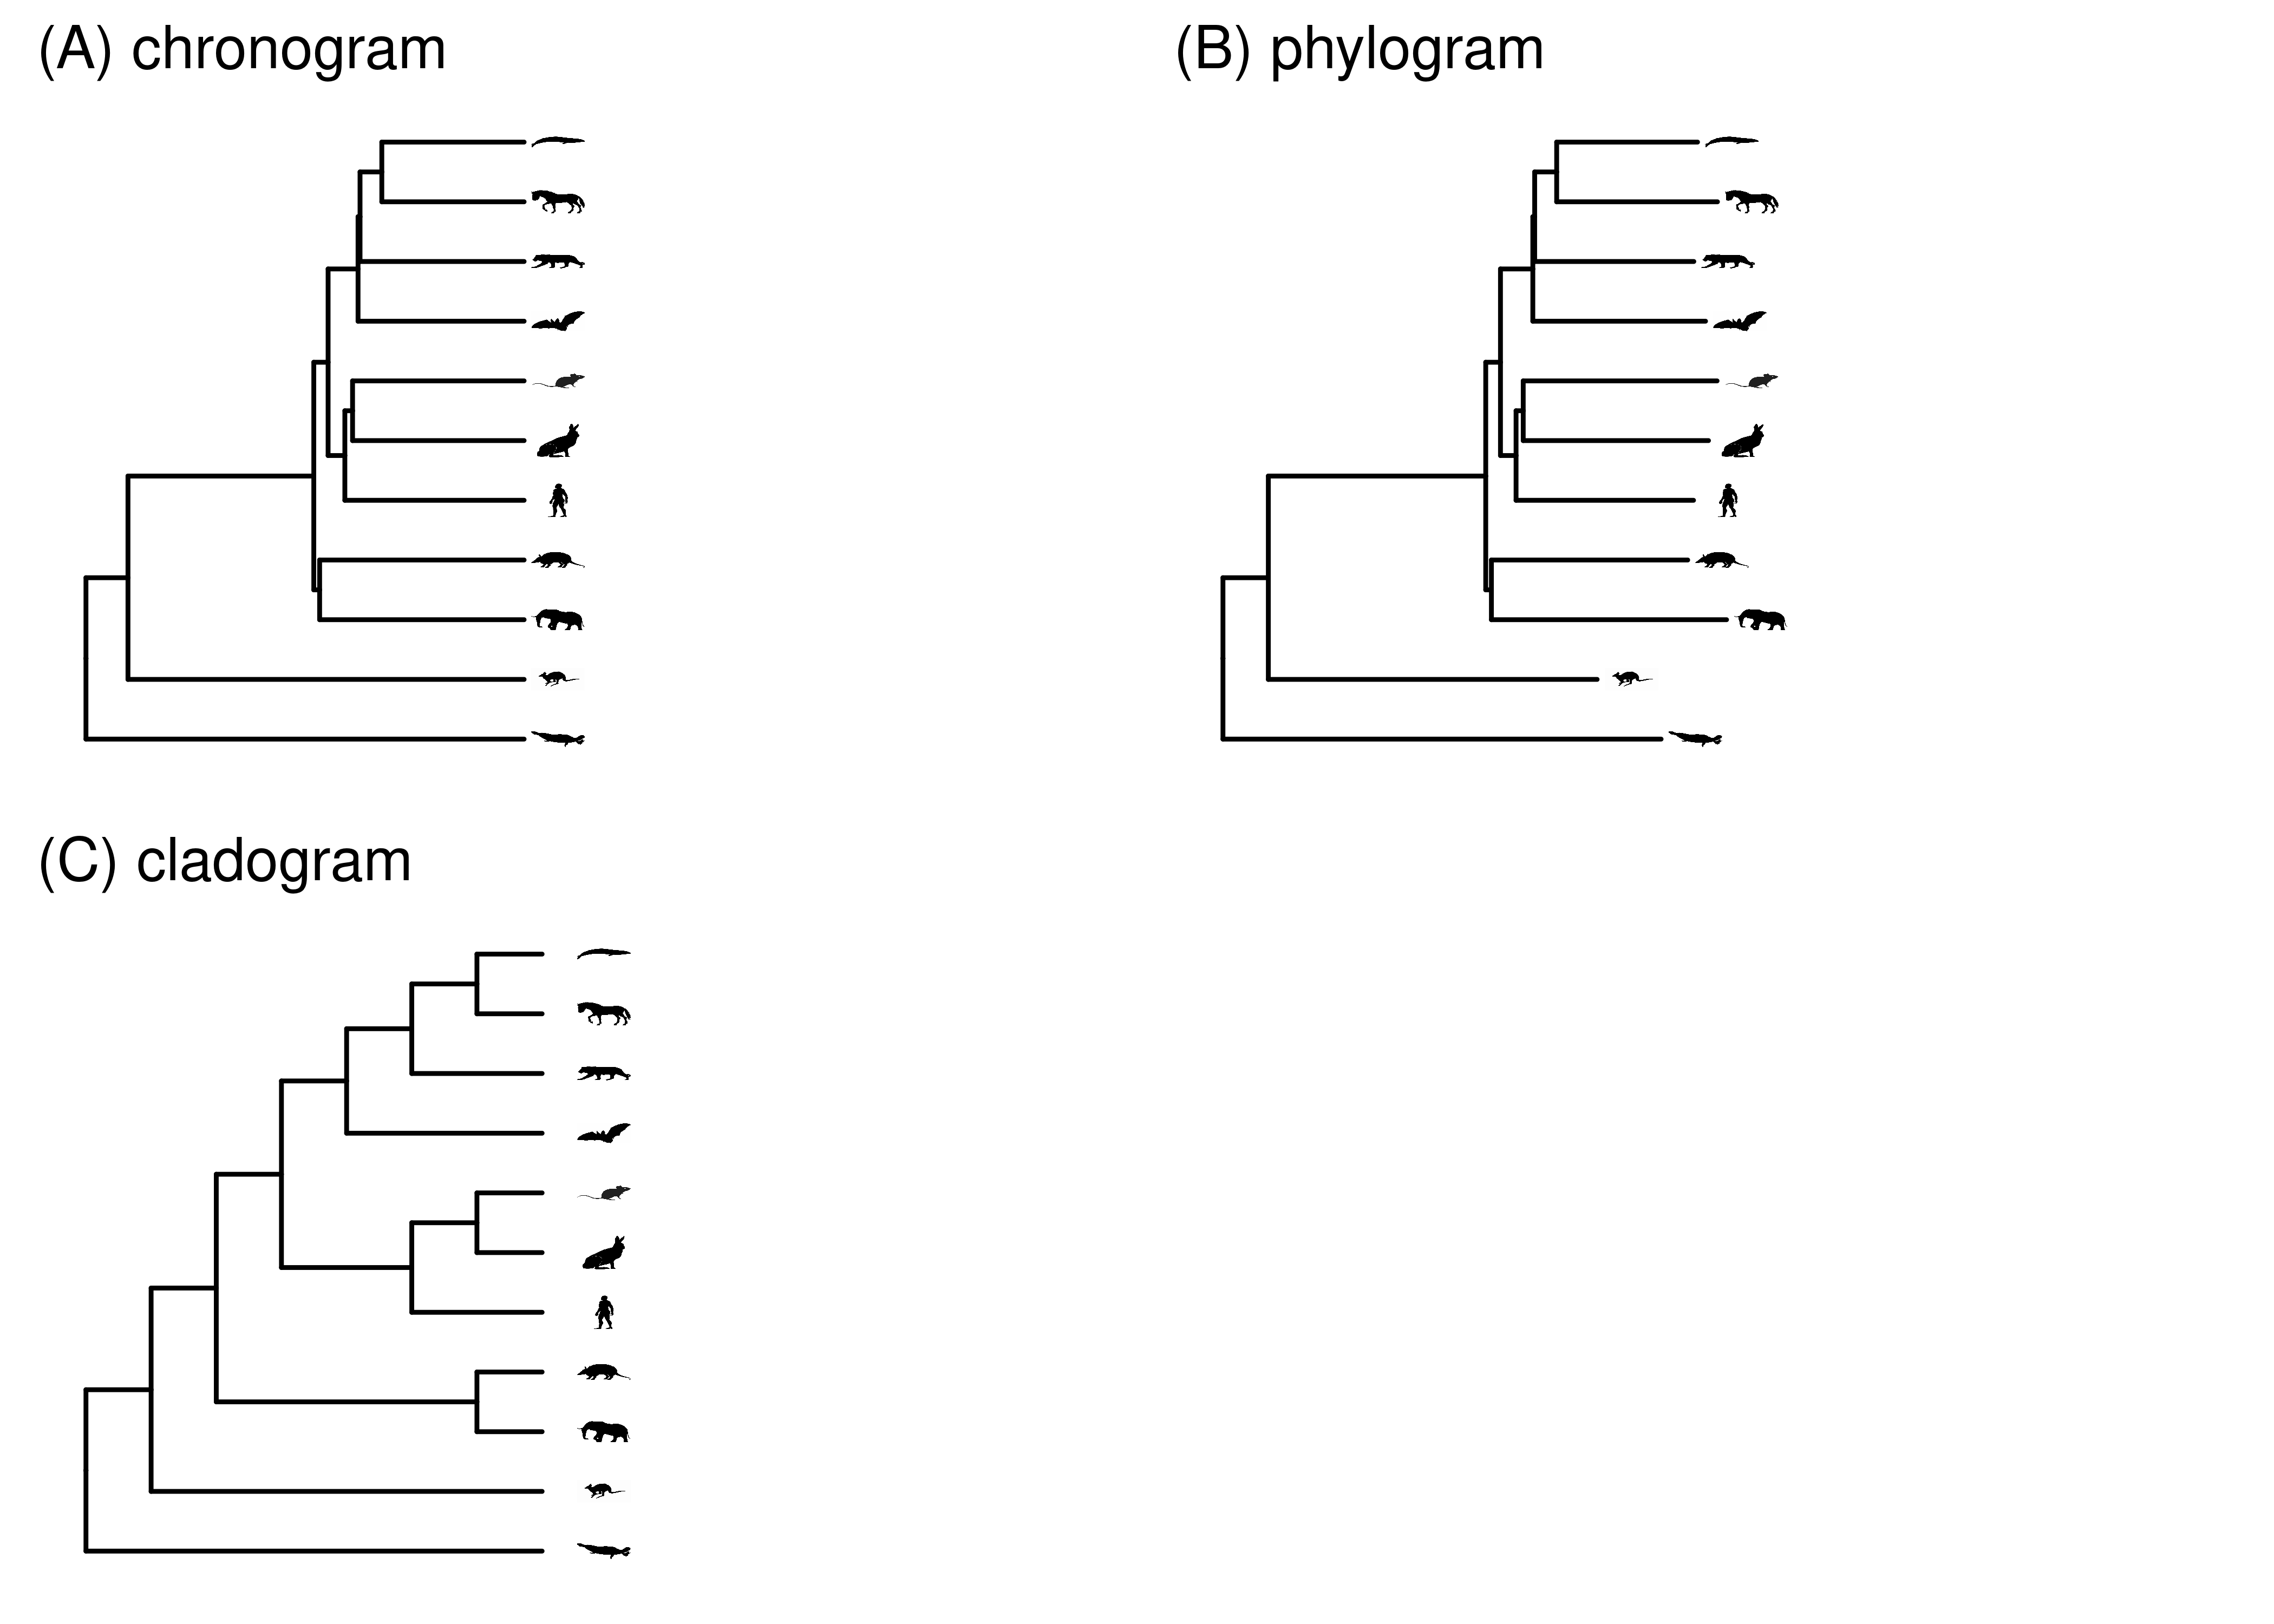 Several types of trees. In a chronogram, branch lengths are scaled according to time. In a phylogram, branch lengths are scaled according to expected amount of evolutionary change, which can differ across characters and branches. In a cladogram, the branch lengths have no meaning. 